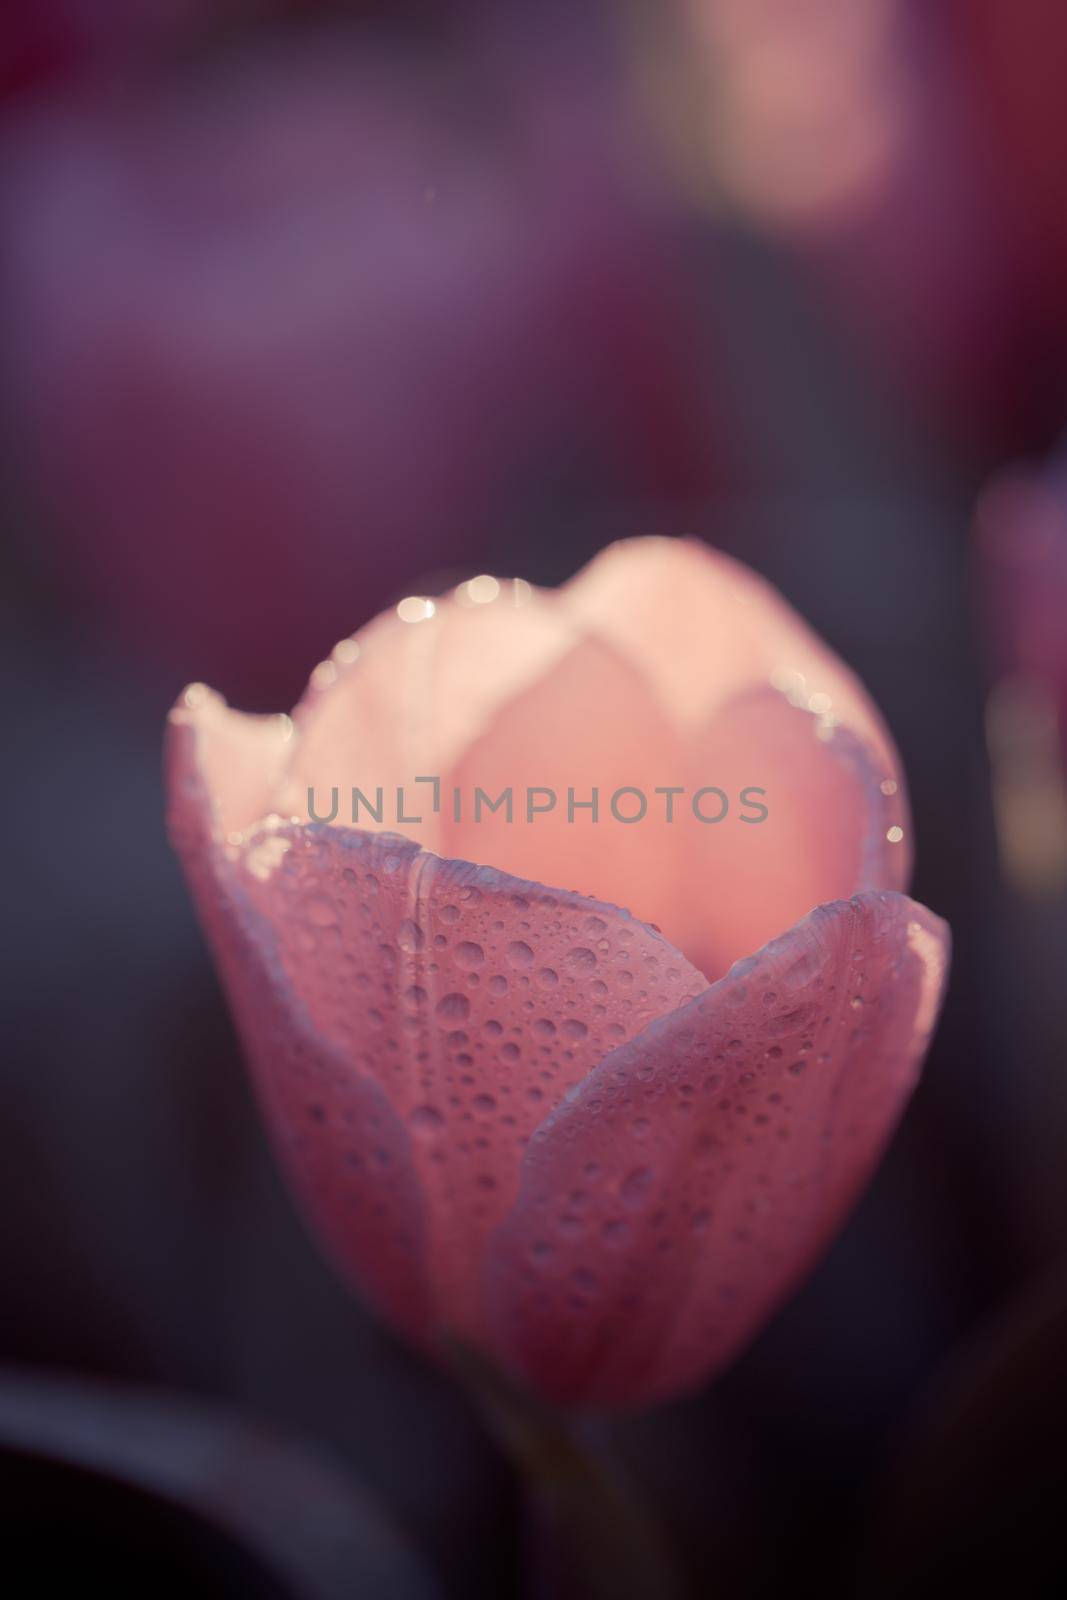 Red white Tulip flower in close up